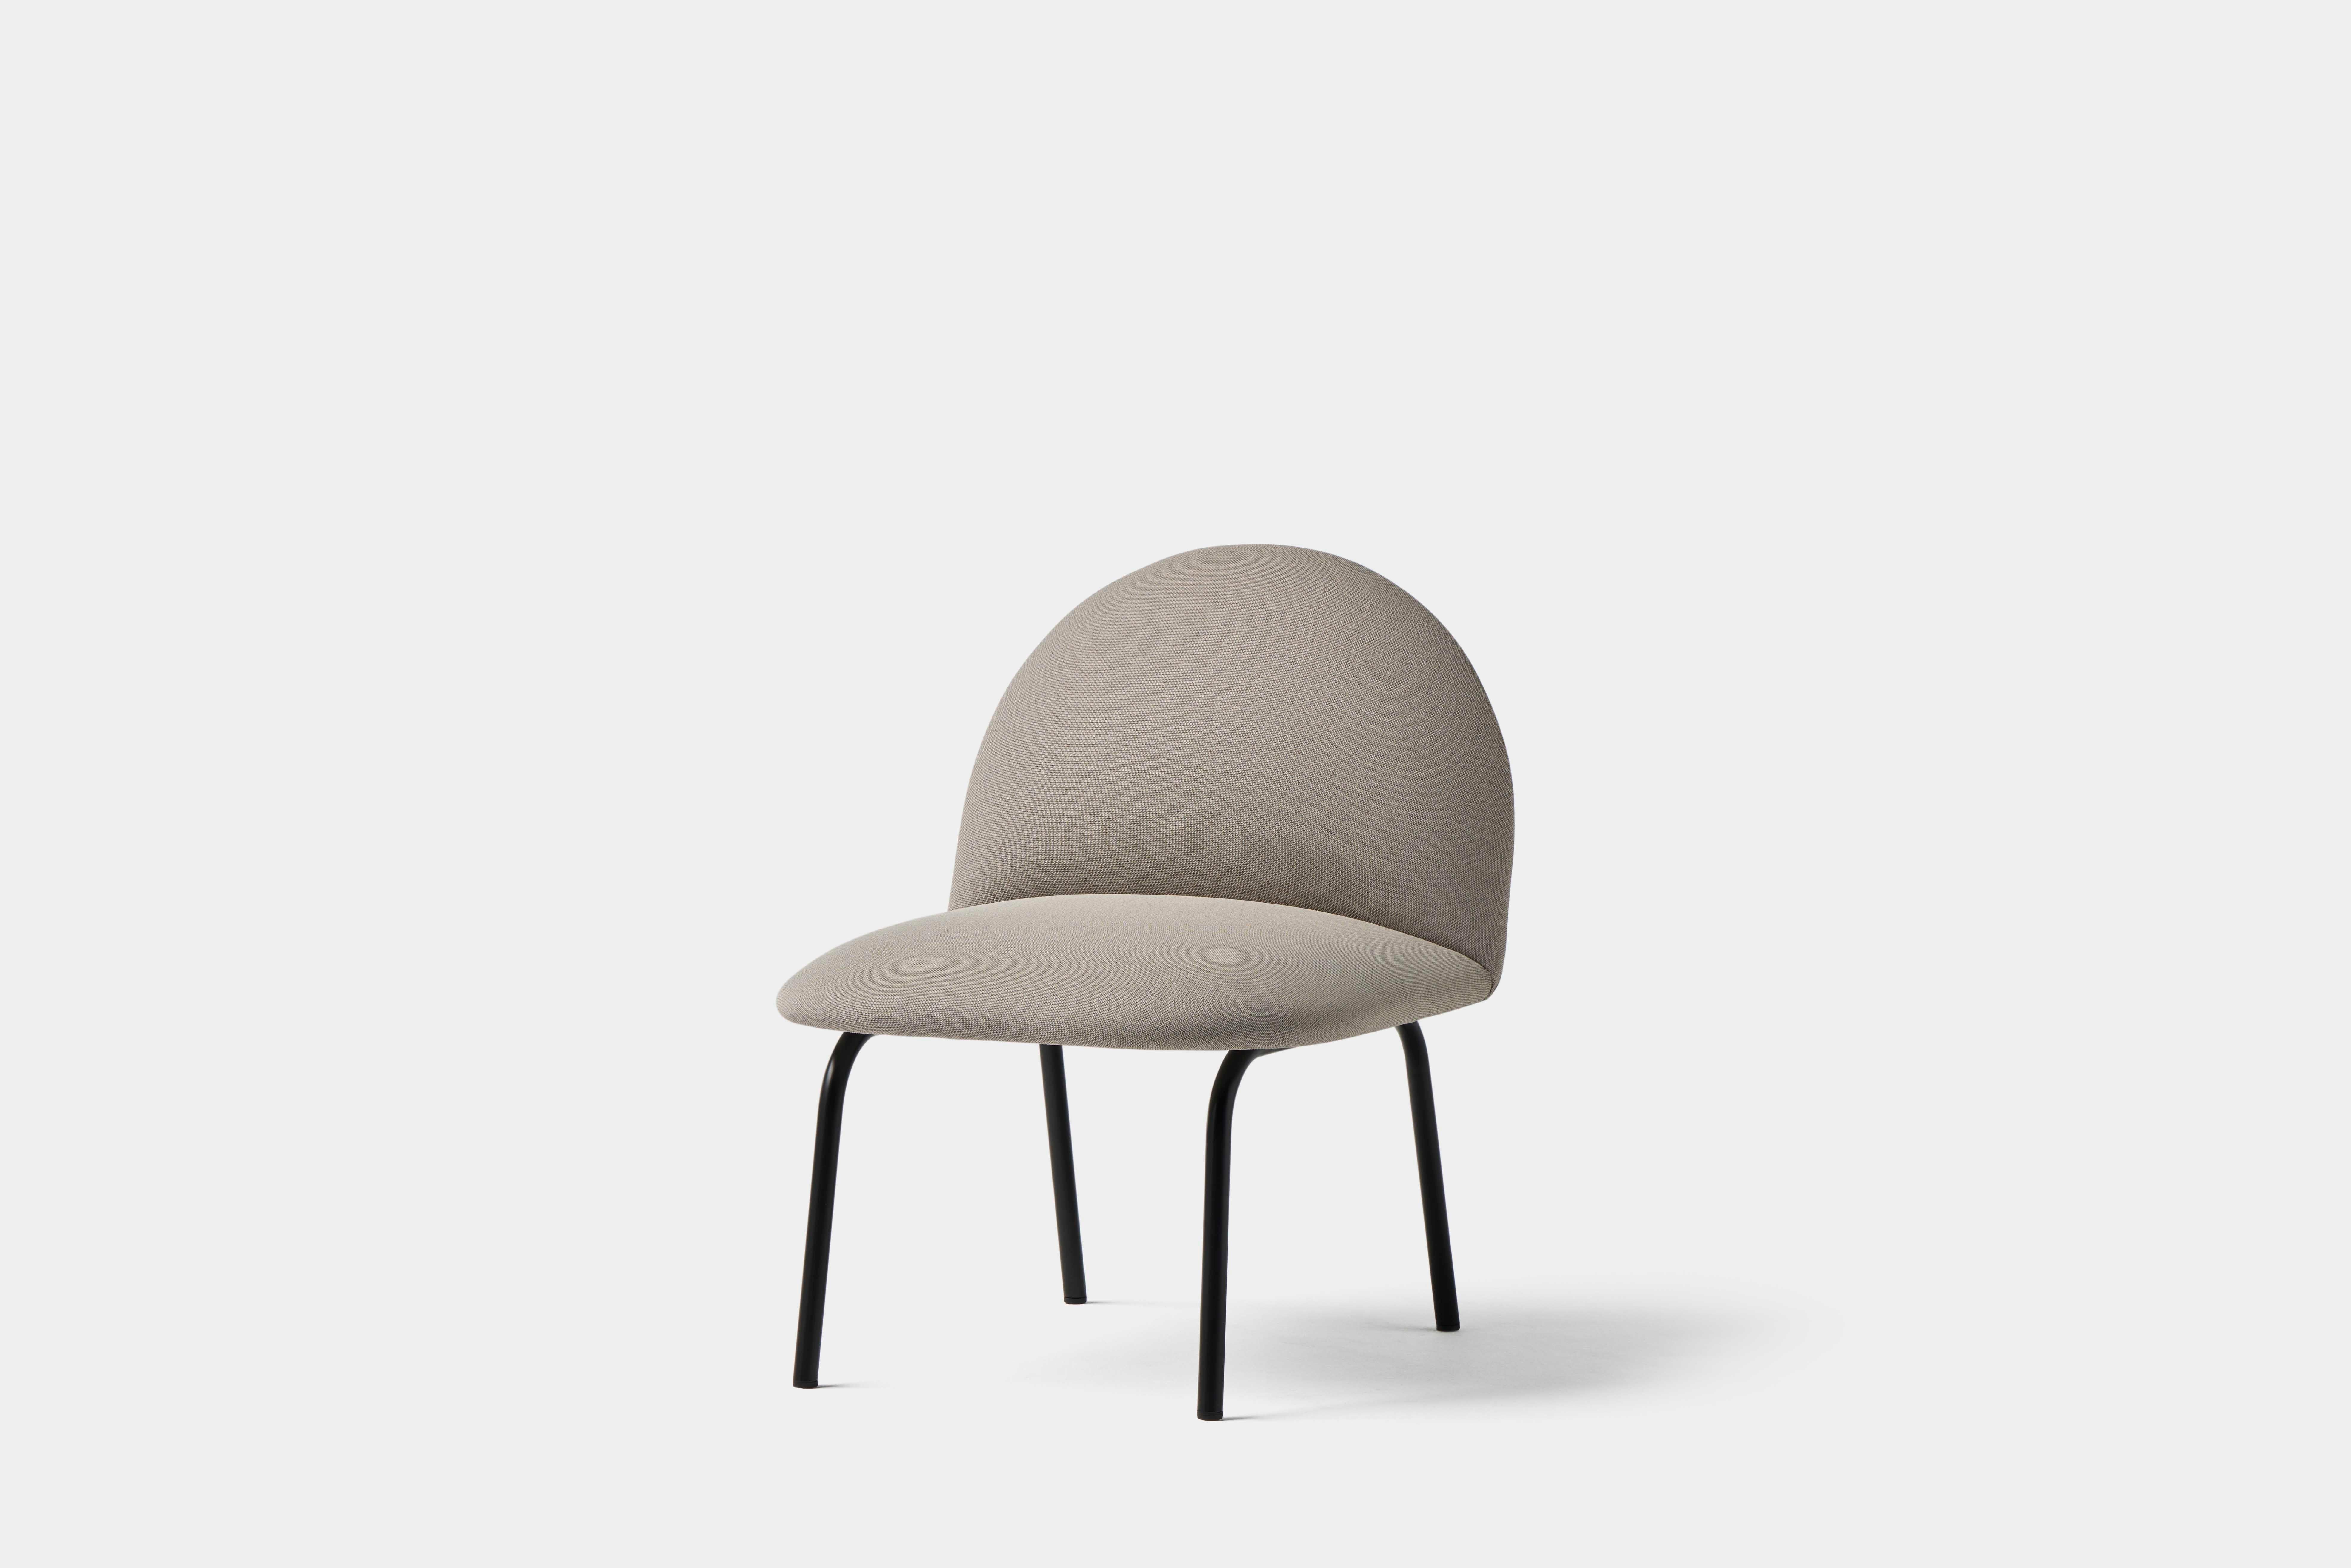 Terra armchair by Pepe Albargues
Dimensions: W 64 x D 70 x H 82 x Seat 46.
Materials: Black painted iron frame and legs for others colours please ask for increment. Foam CMHR (high resilience and flame retardant) for all our cushion filling